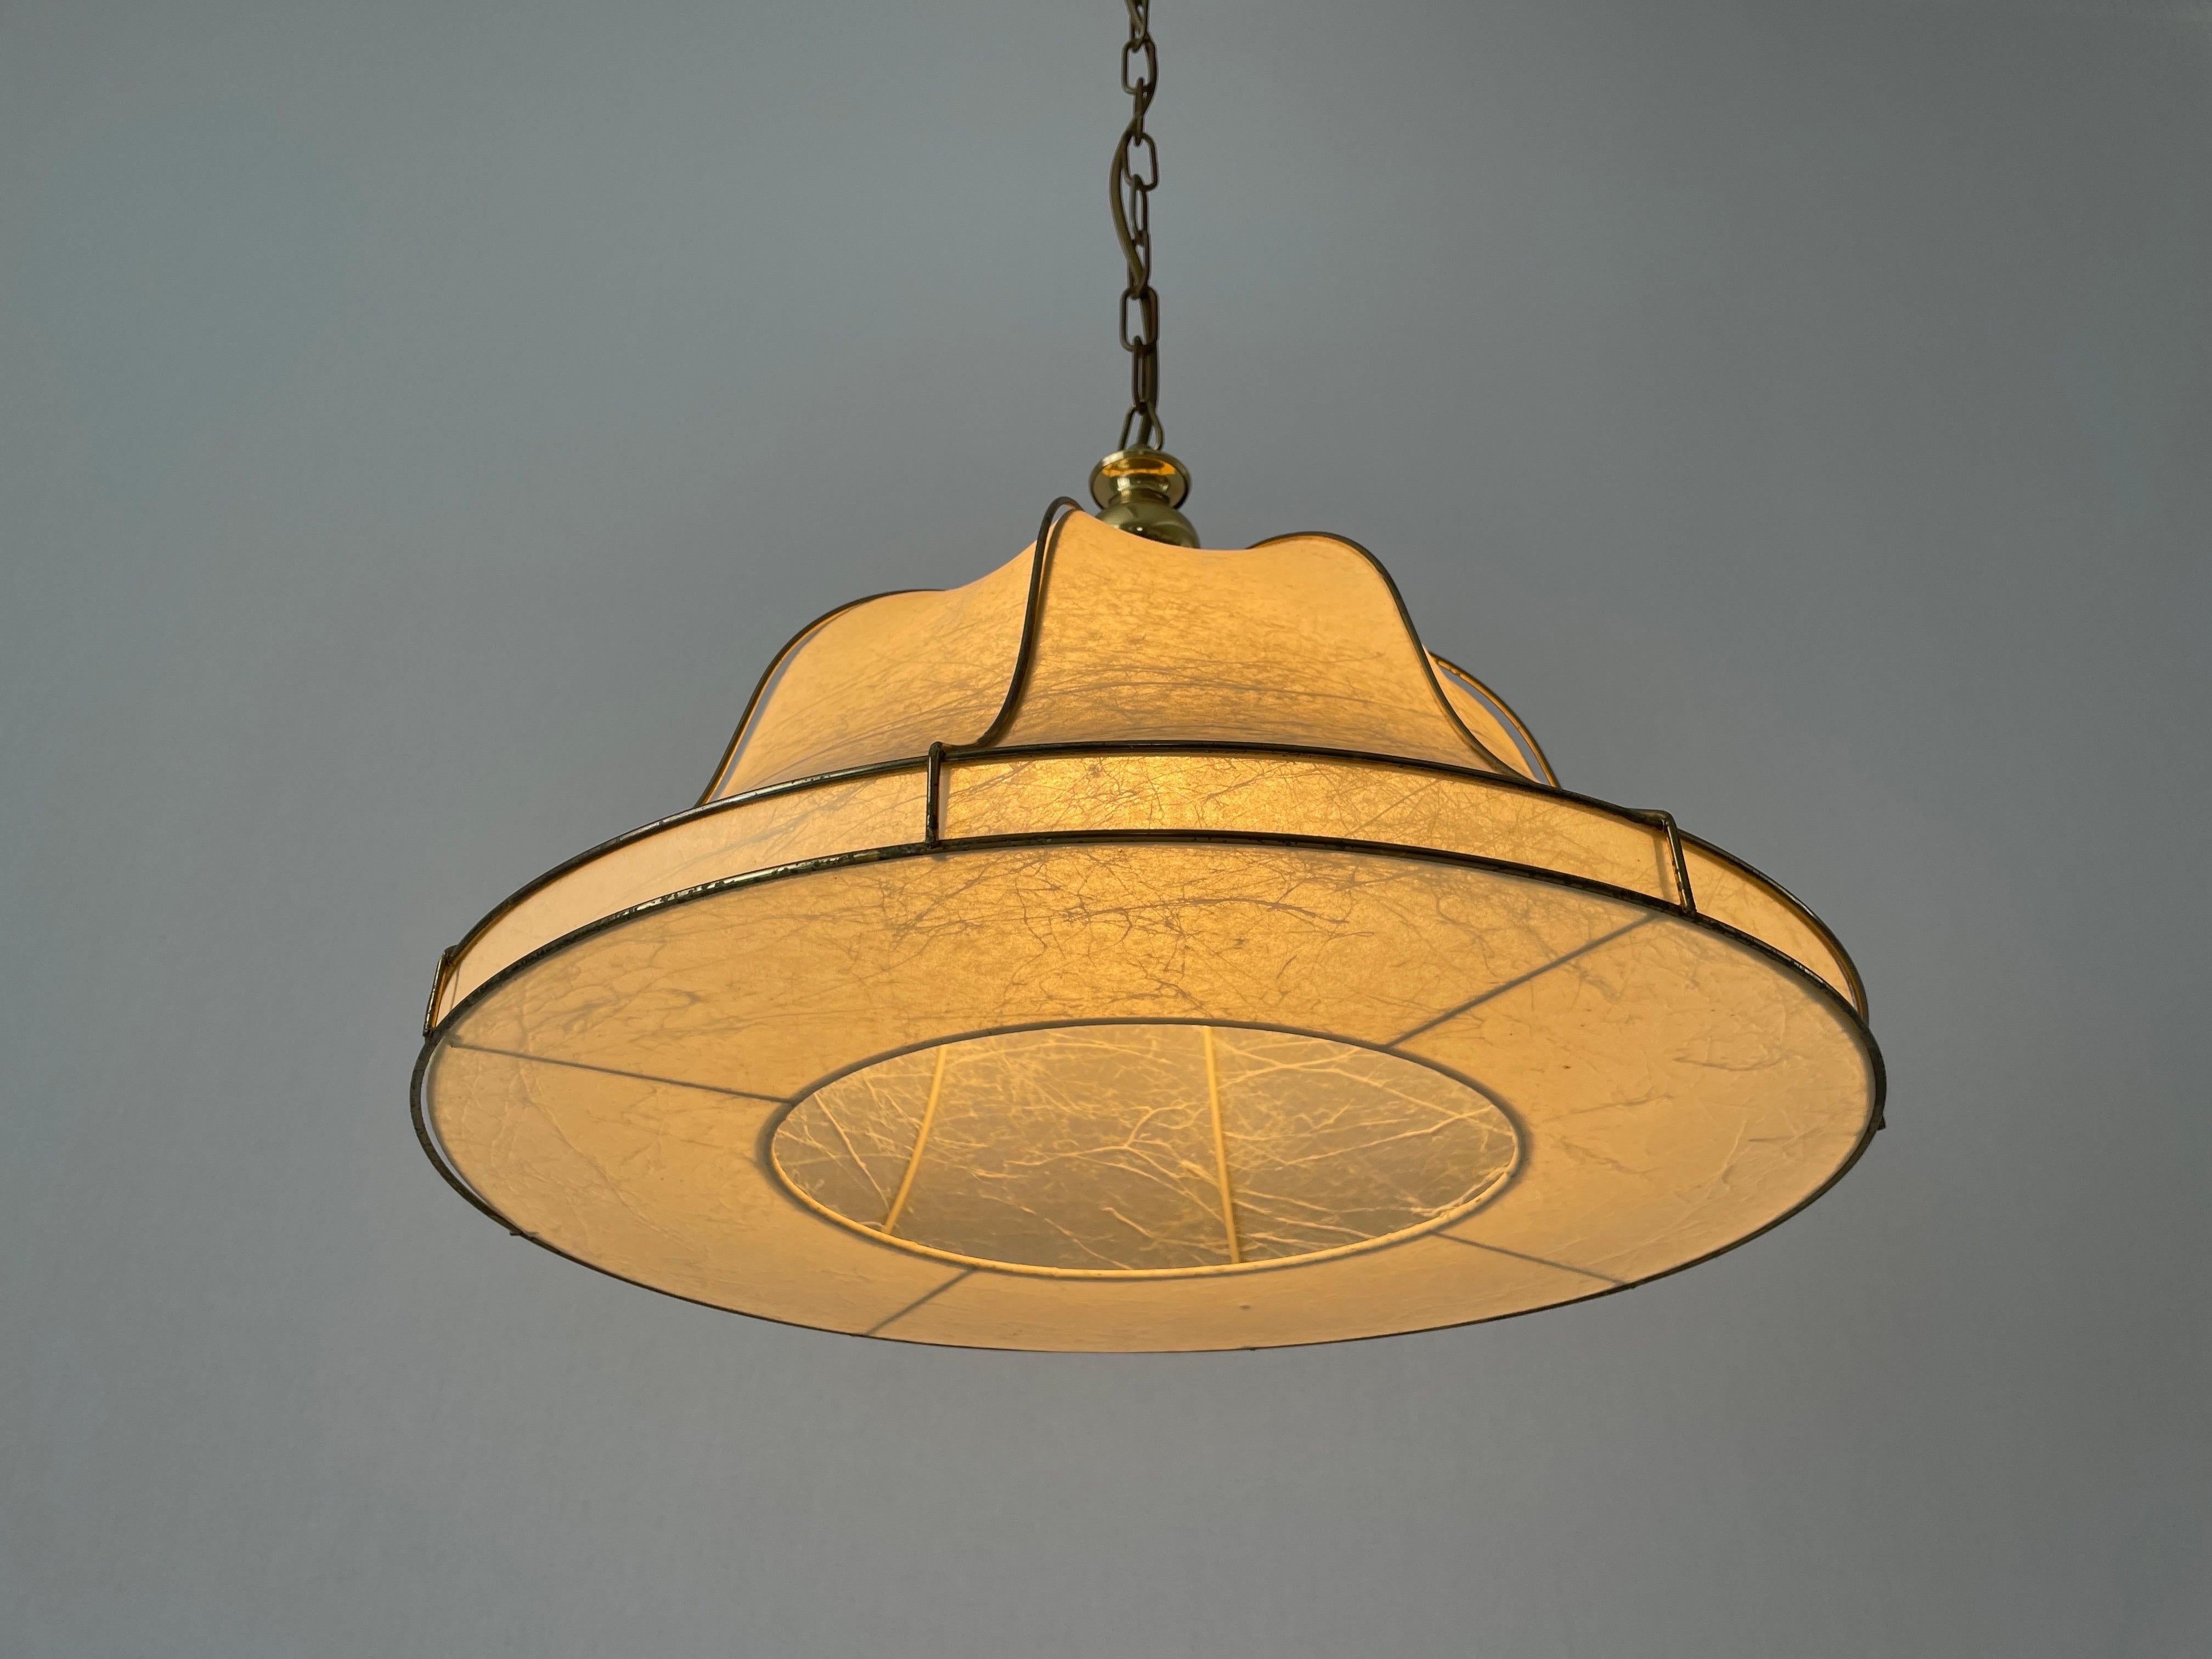 Cocoon Pendant Lamp with Gold Metal Shade Frame by Goldkant, 1960s, Germany For Sale 5